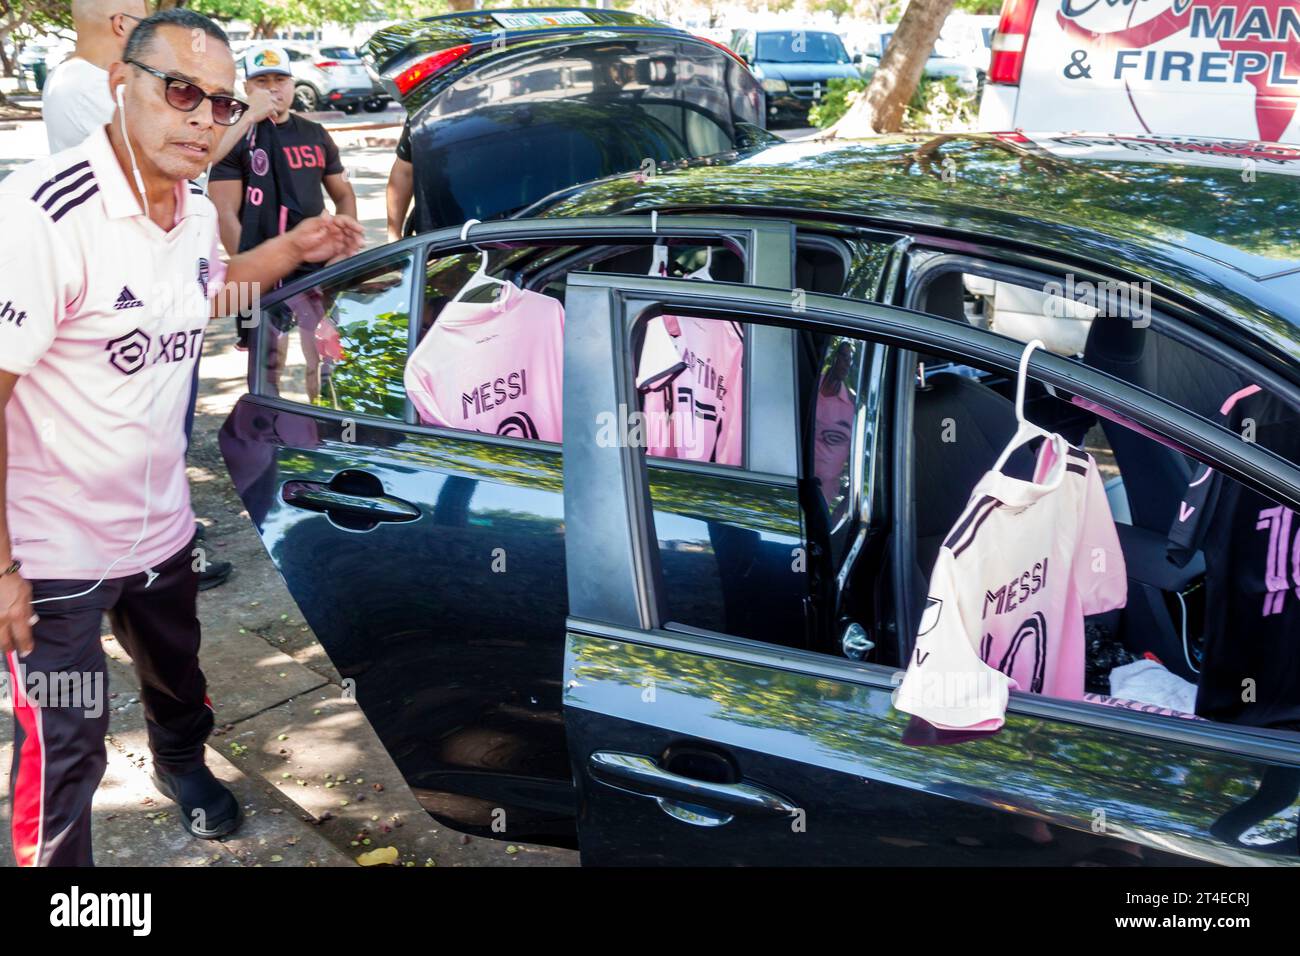 Miami Beach Florida,North Beach parking lot car park,selling Messi soccer football futbol shirts from out of car,man men male,adult,resident,street ve Stock Photo